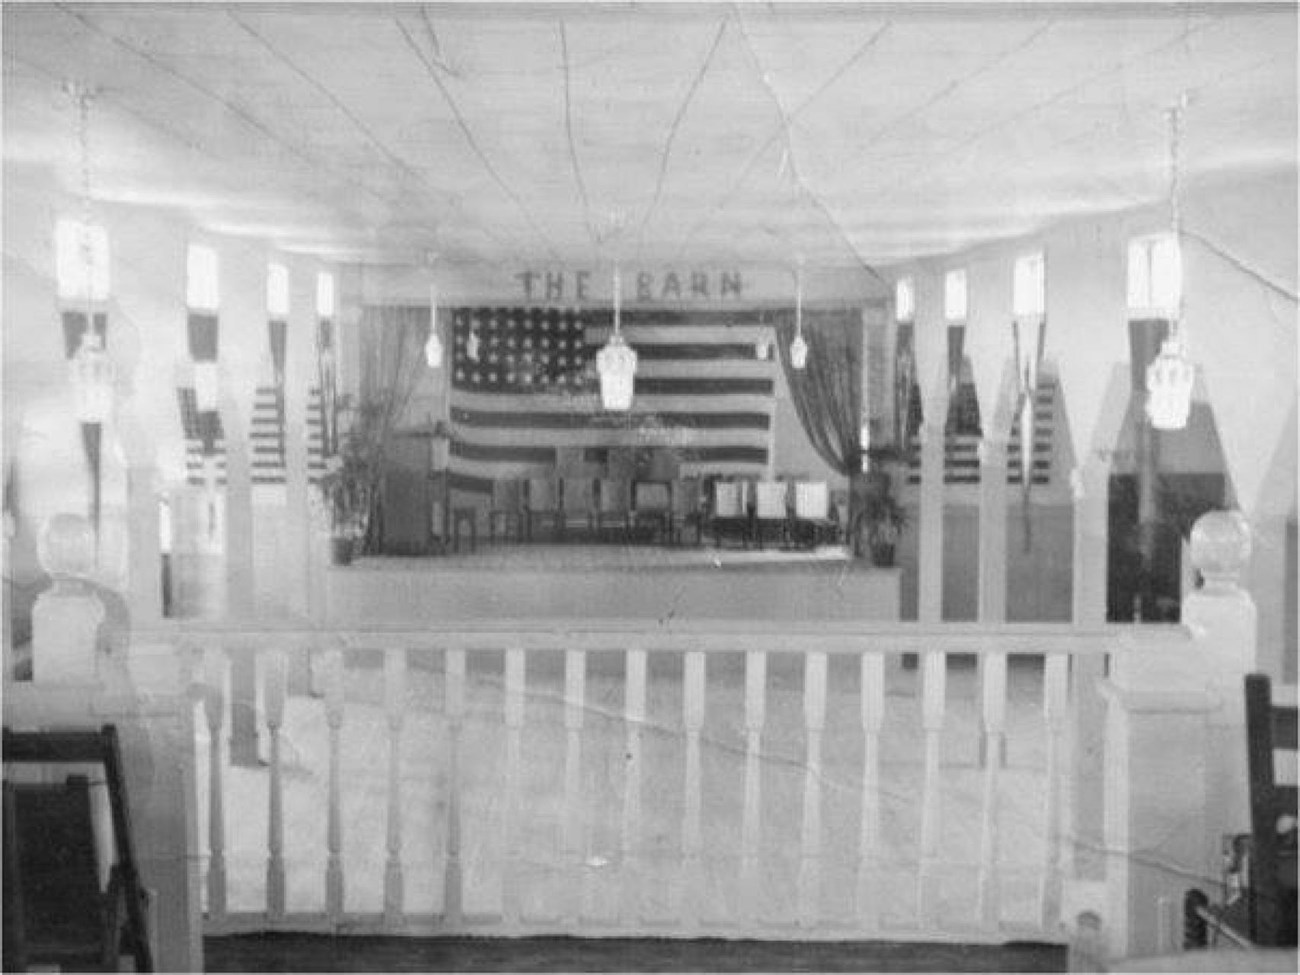 A stage room with lanterns hanging from the ceiling and an American flag hung on the back wall. There is a fence separating the room from another that is not pictured. "The Barn" is written on top of where the flag hangs